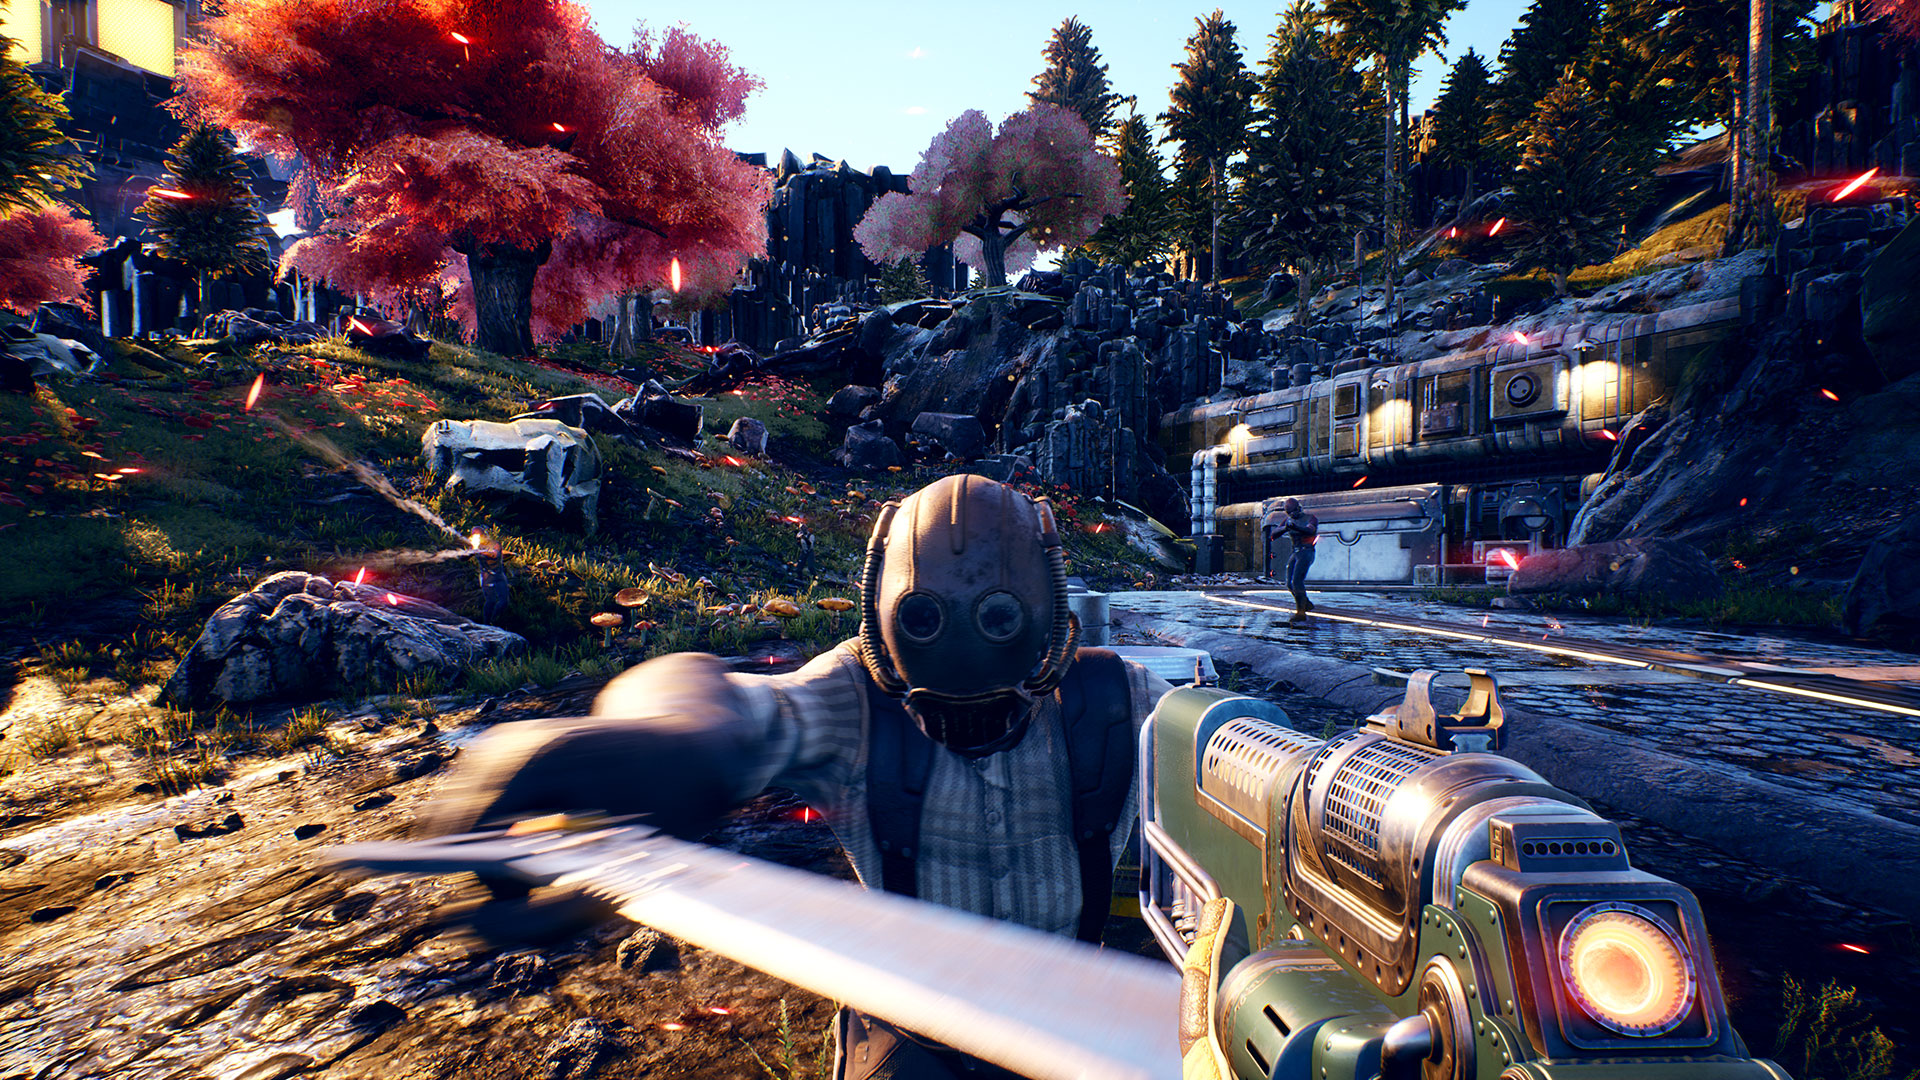 The Outer Worlds New Trailer Gives a Nice Overview; Releases October 25